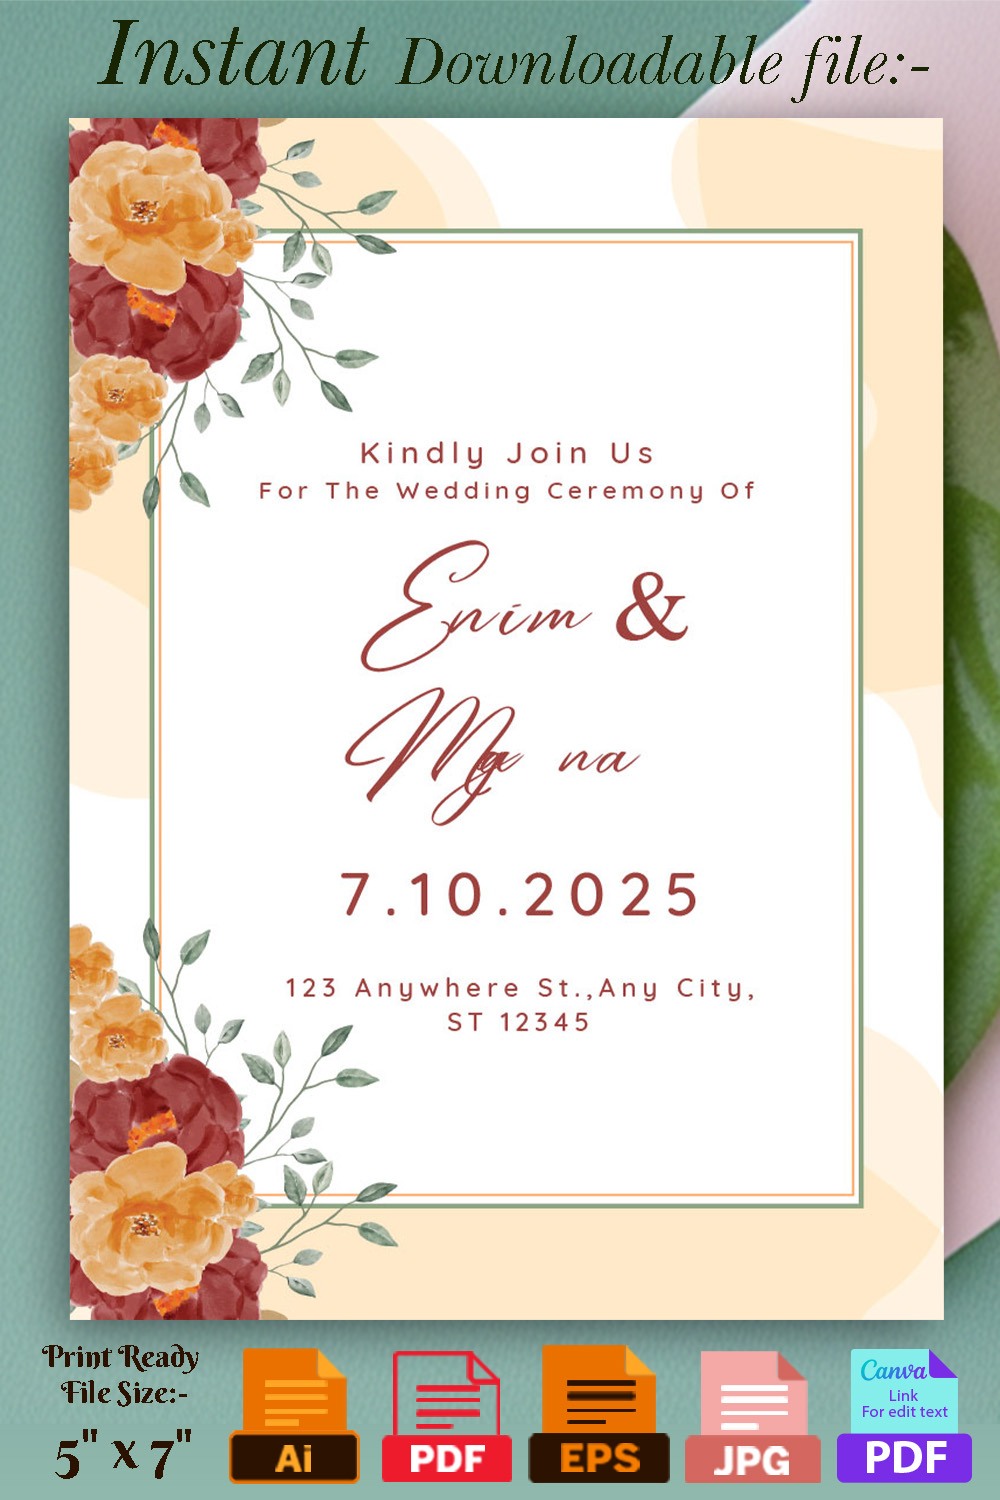 Image of amazing wedding invitation in pastel colors with flowers.